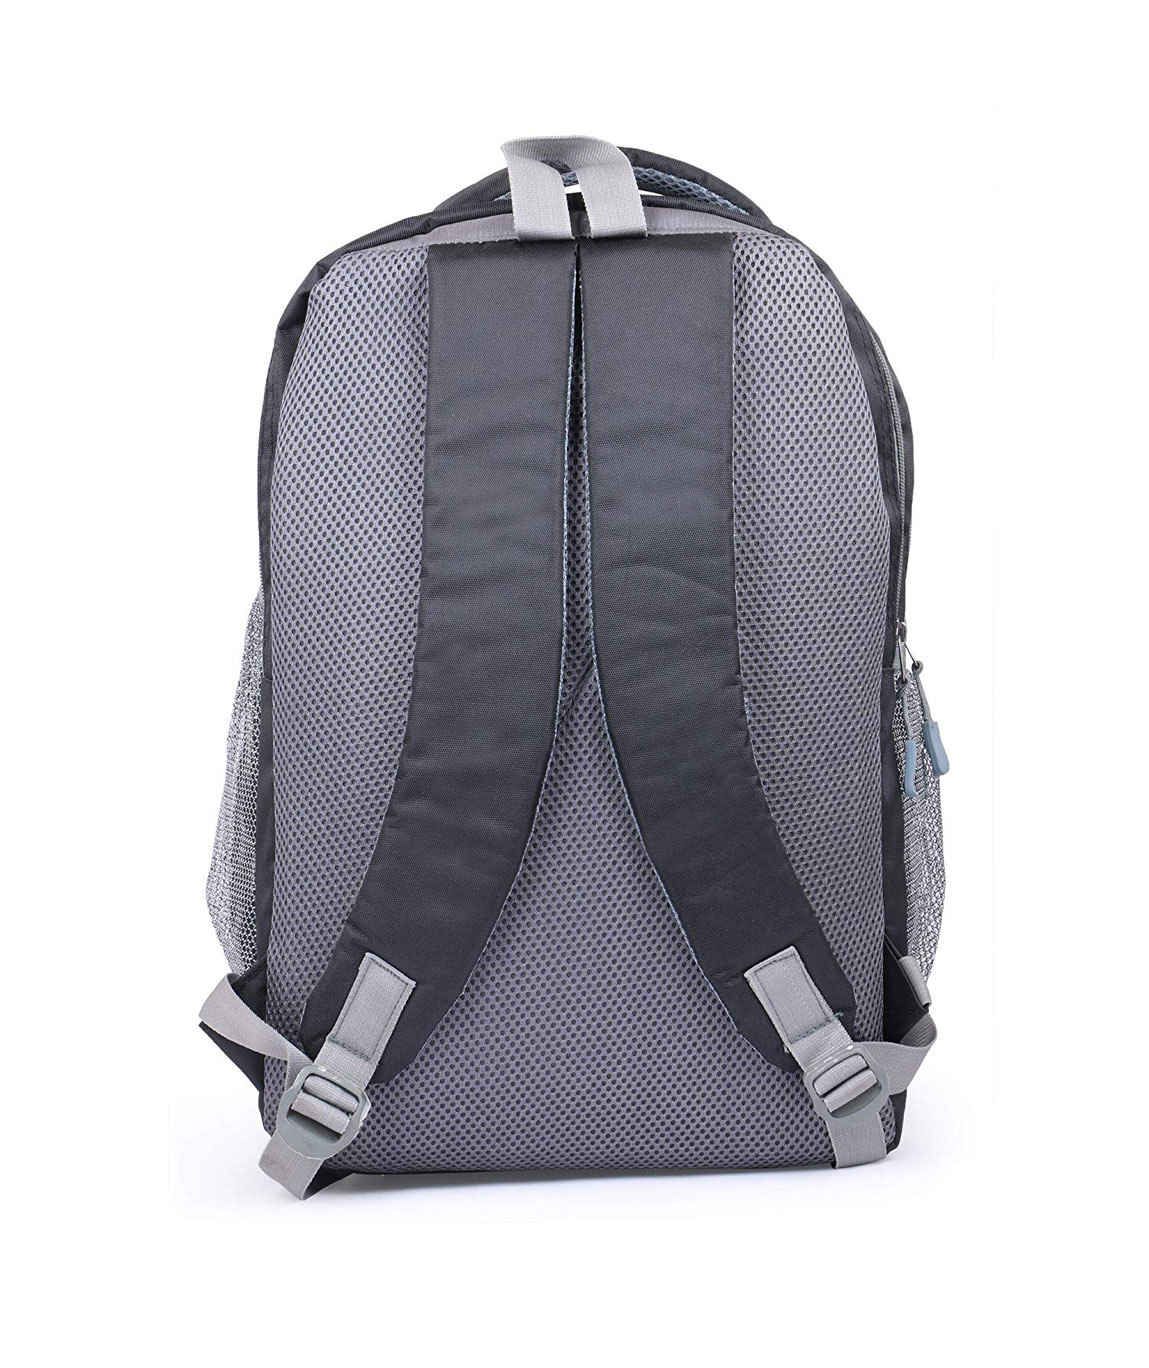 Large 35 L Laptop Backpack LEADER 2.0 Unisex backpack with Rain Cover Price  in India, Full Specifications & Offers | DTashion.com